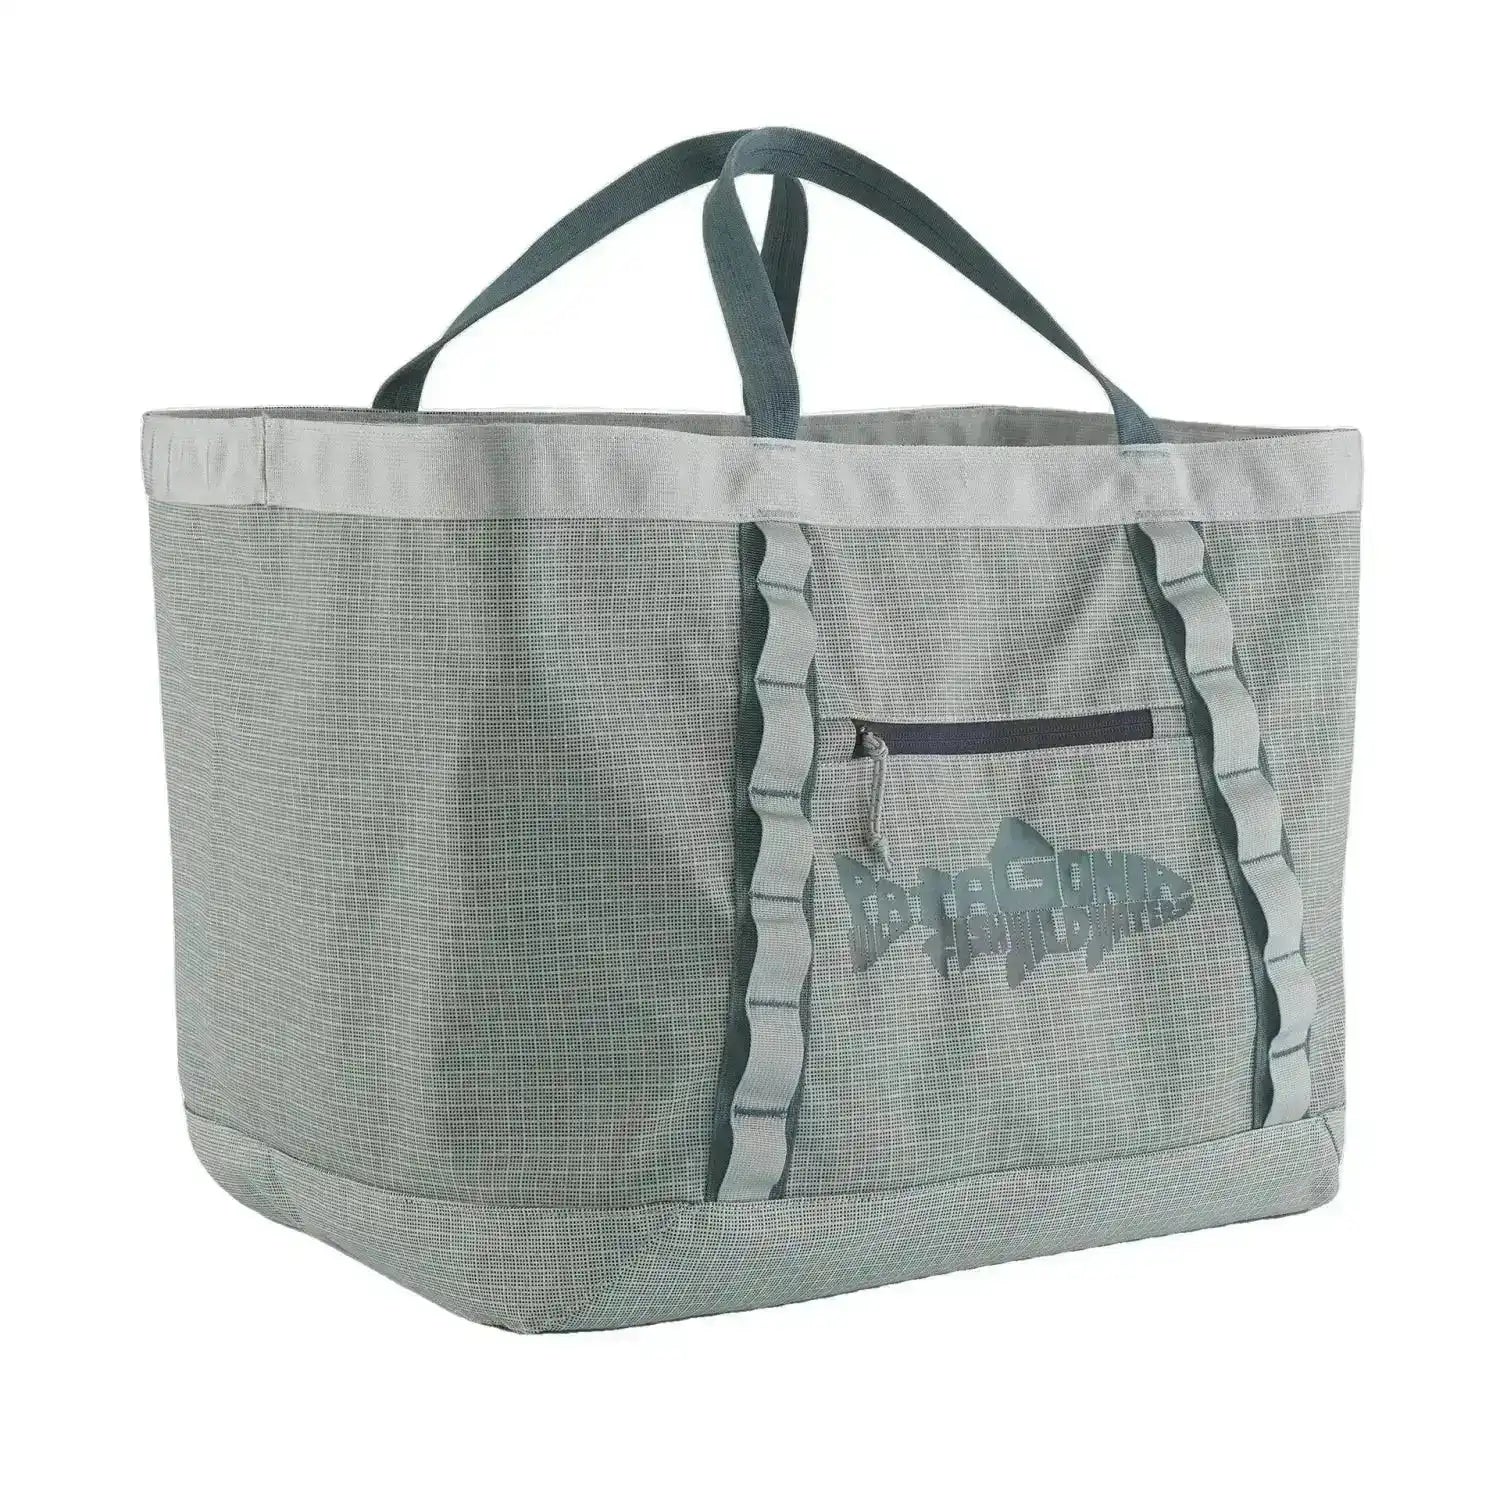 Patagonia Black Hole® Gear Tote 61L, Waterline Sleet Green, front and side view